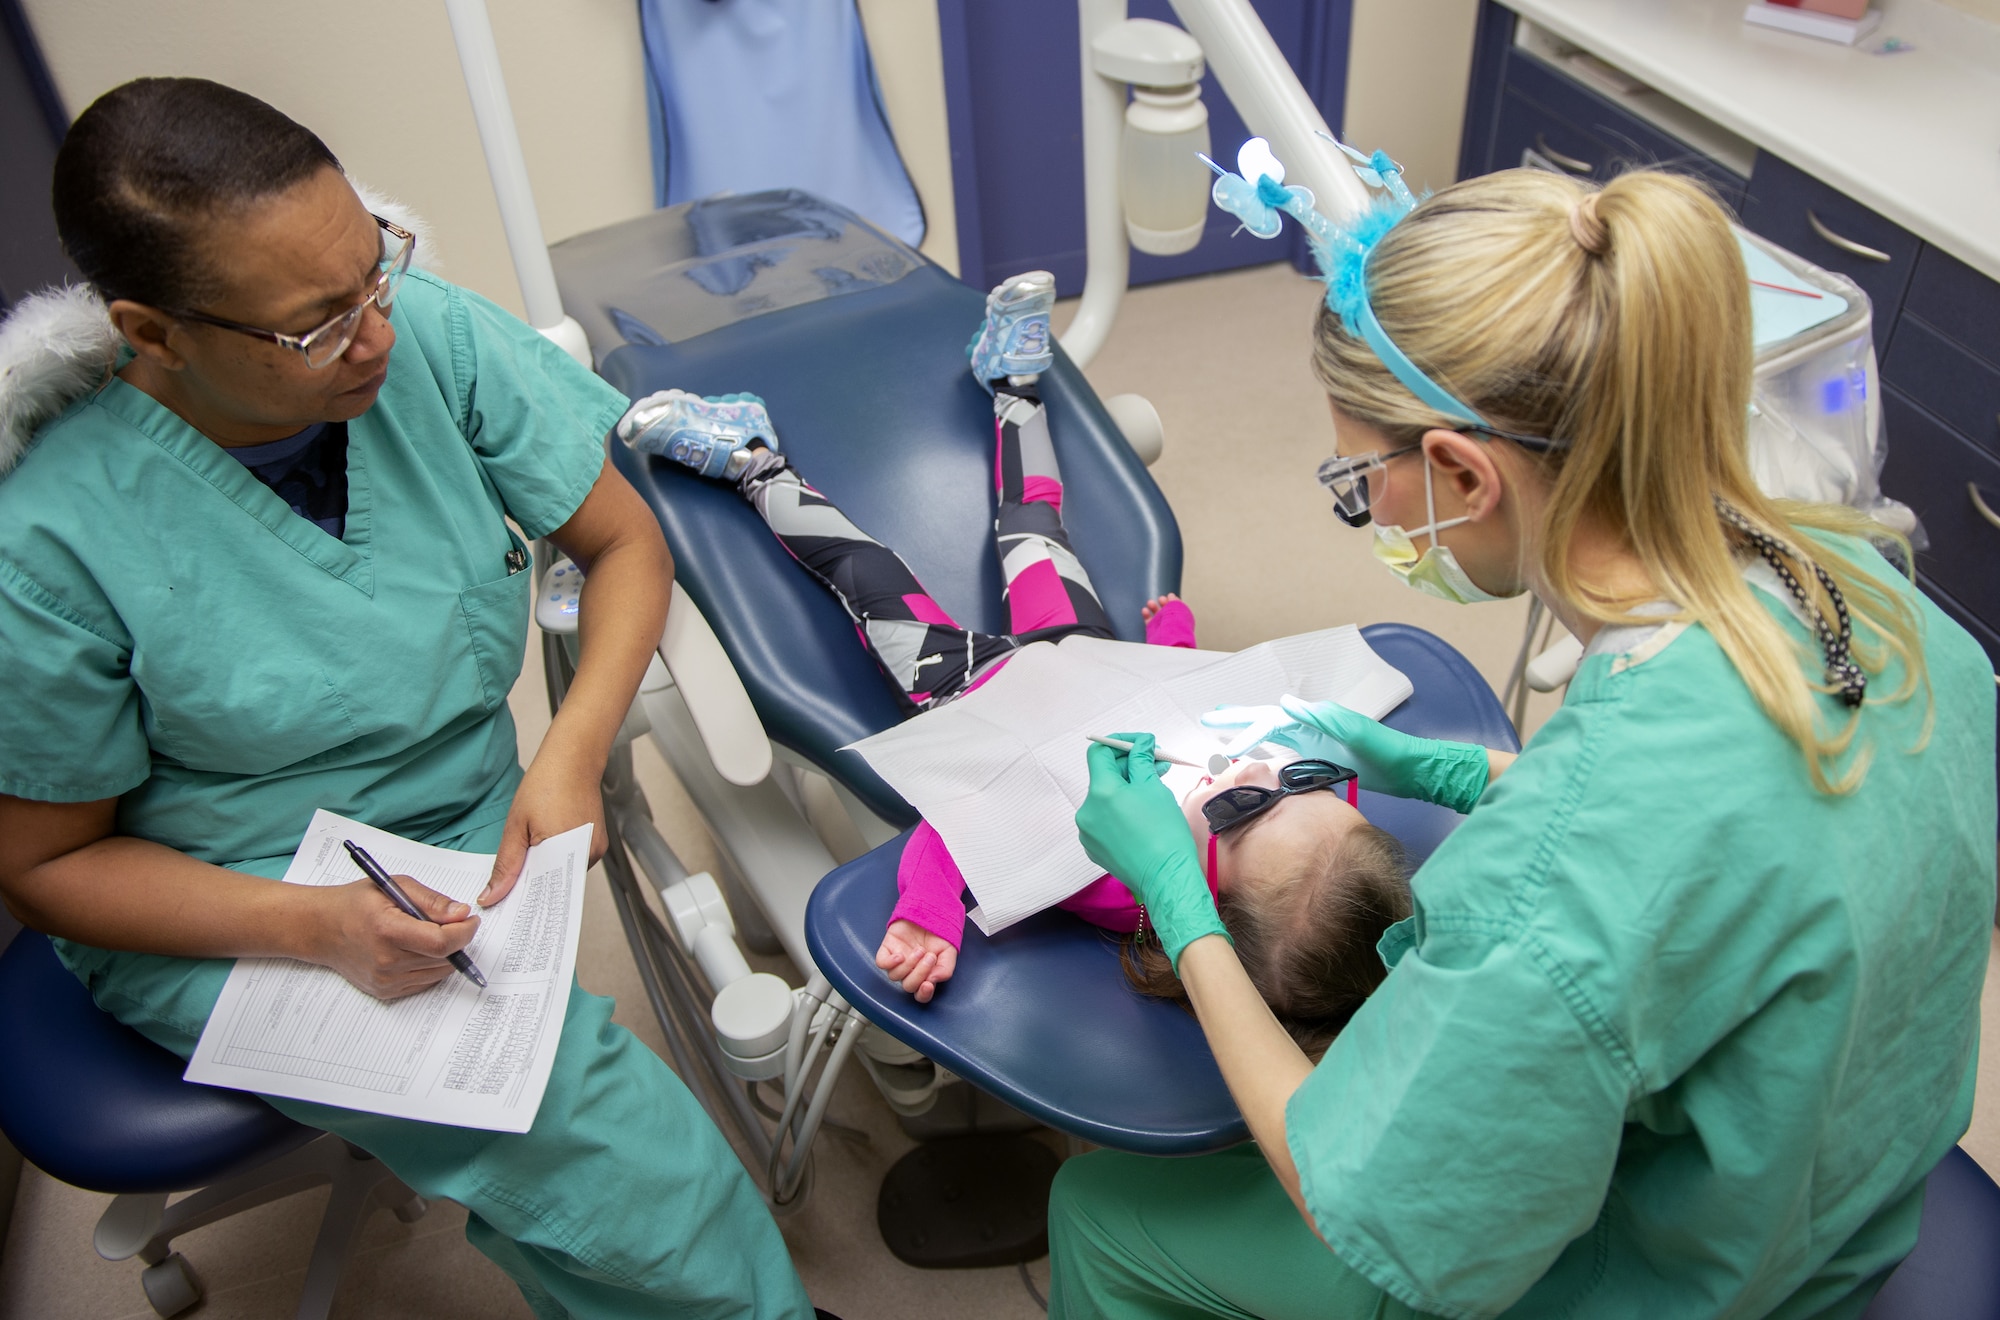 A child receives dental treatment during the “Give Kids a Smile” day event March 9, 2019, held by the 375th Dental Squadron clinic on Scott Air Force Base, Illinois.  Children registered for the event were given the chance to receive cleanings, fillings, and more to at no cost to their parents.  (U.S. Air Force photo by Airman 1st Class Isaiah Gonzalez)